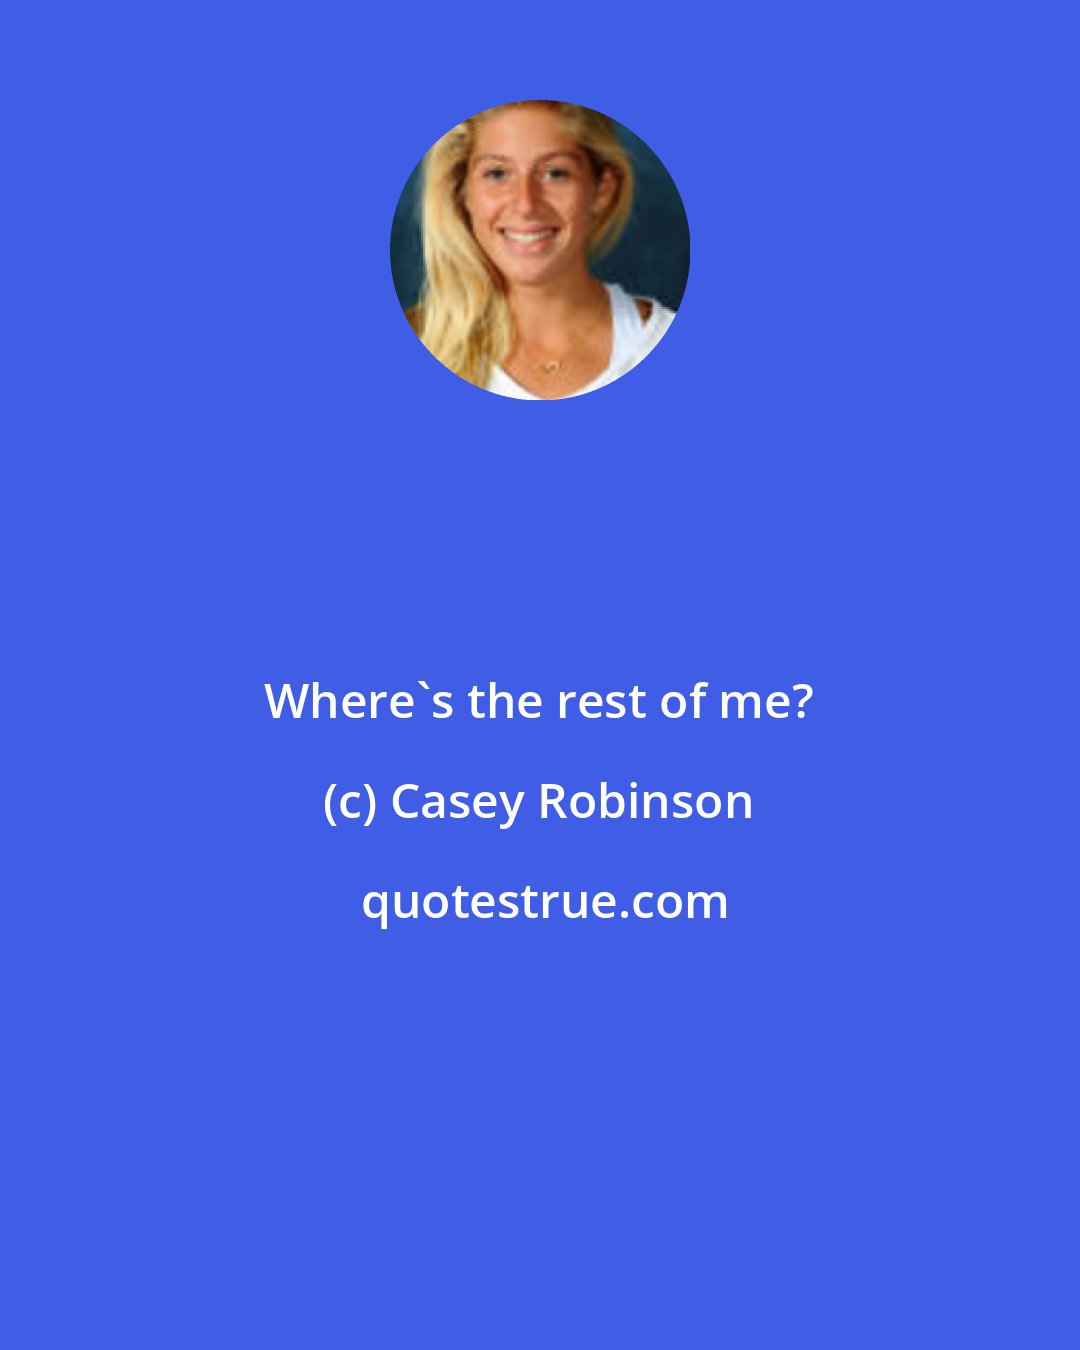 Casey Robinson: Where's the rest of me?